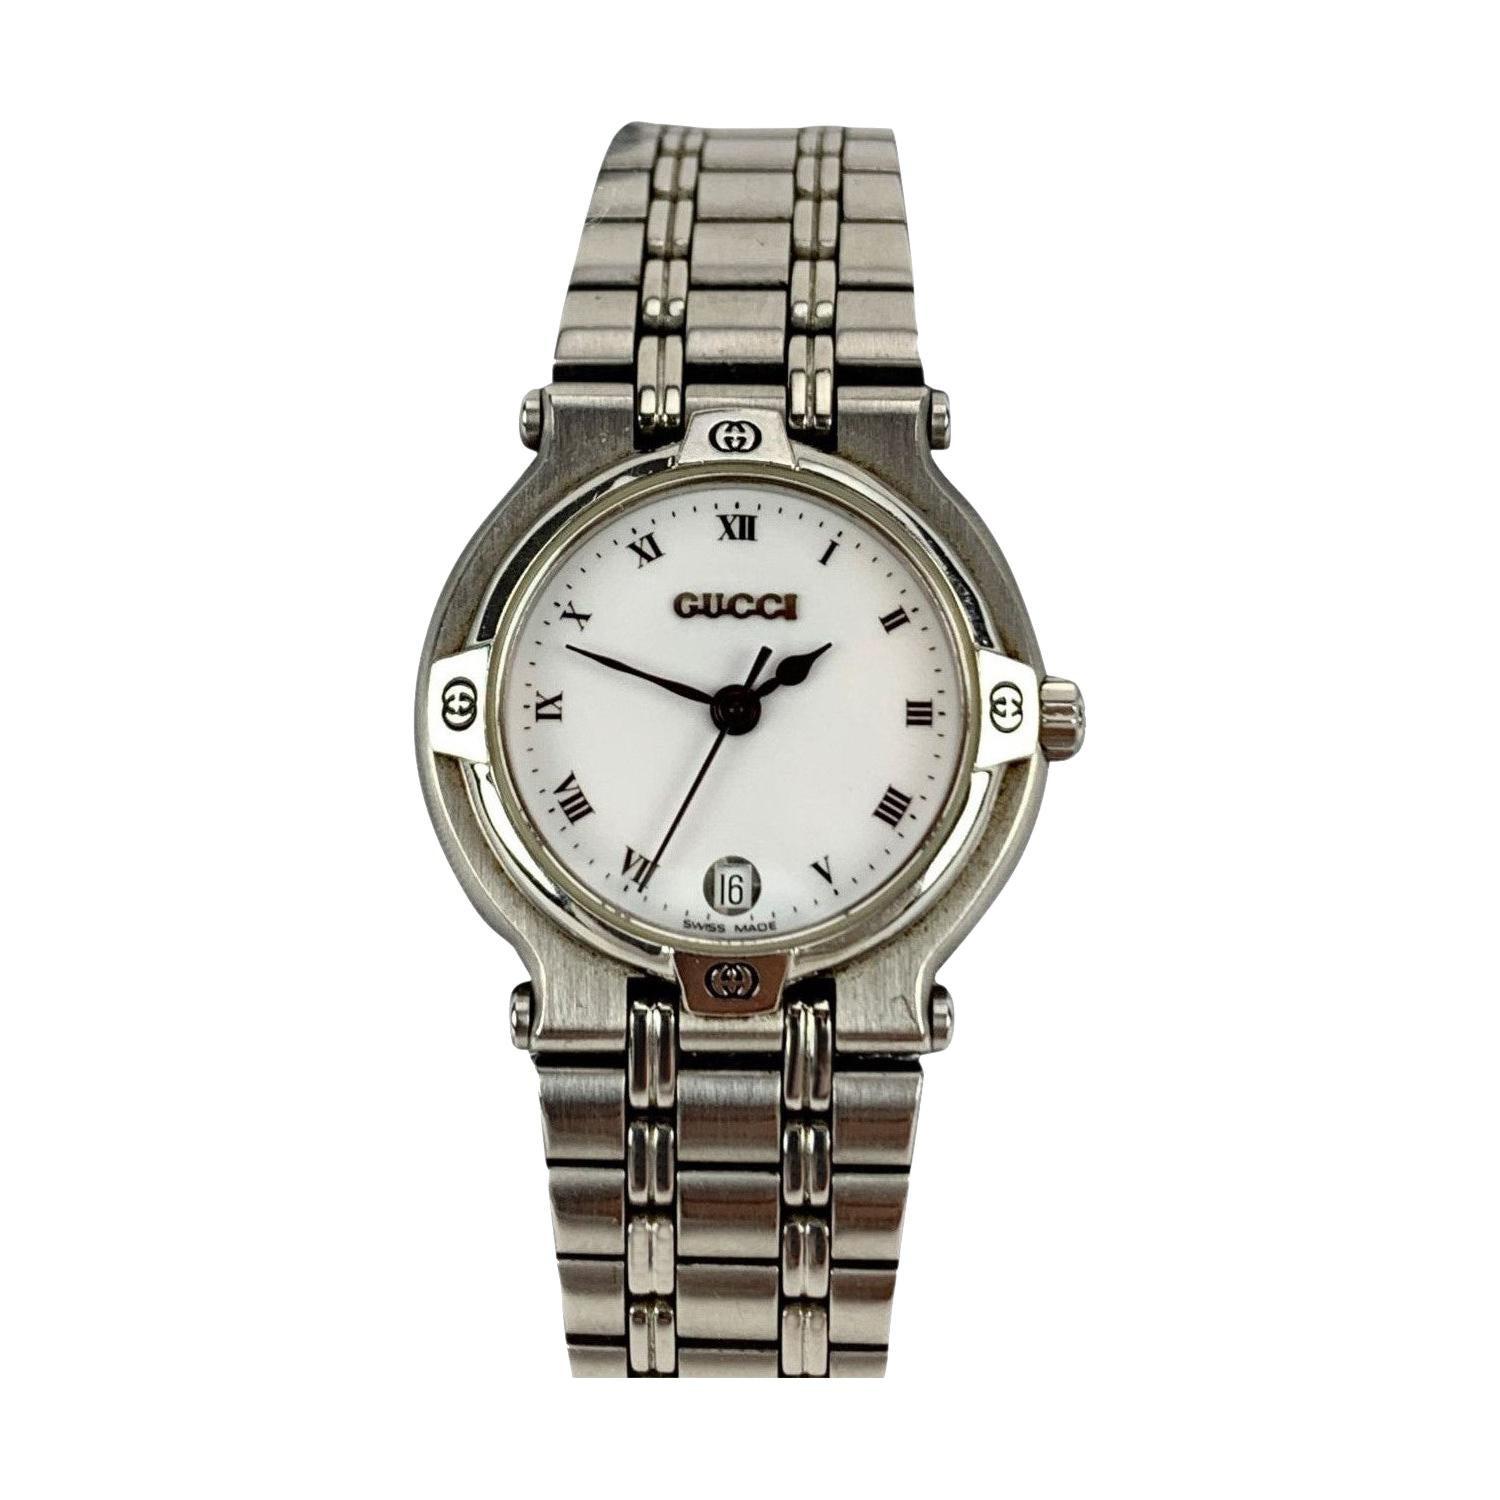 Gucci Vintage Stainless Steel Mod 9100 L Wrist Watch White Dial